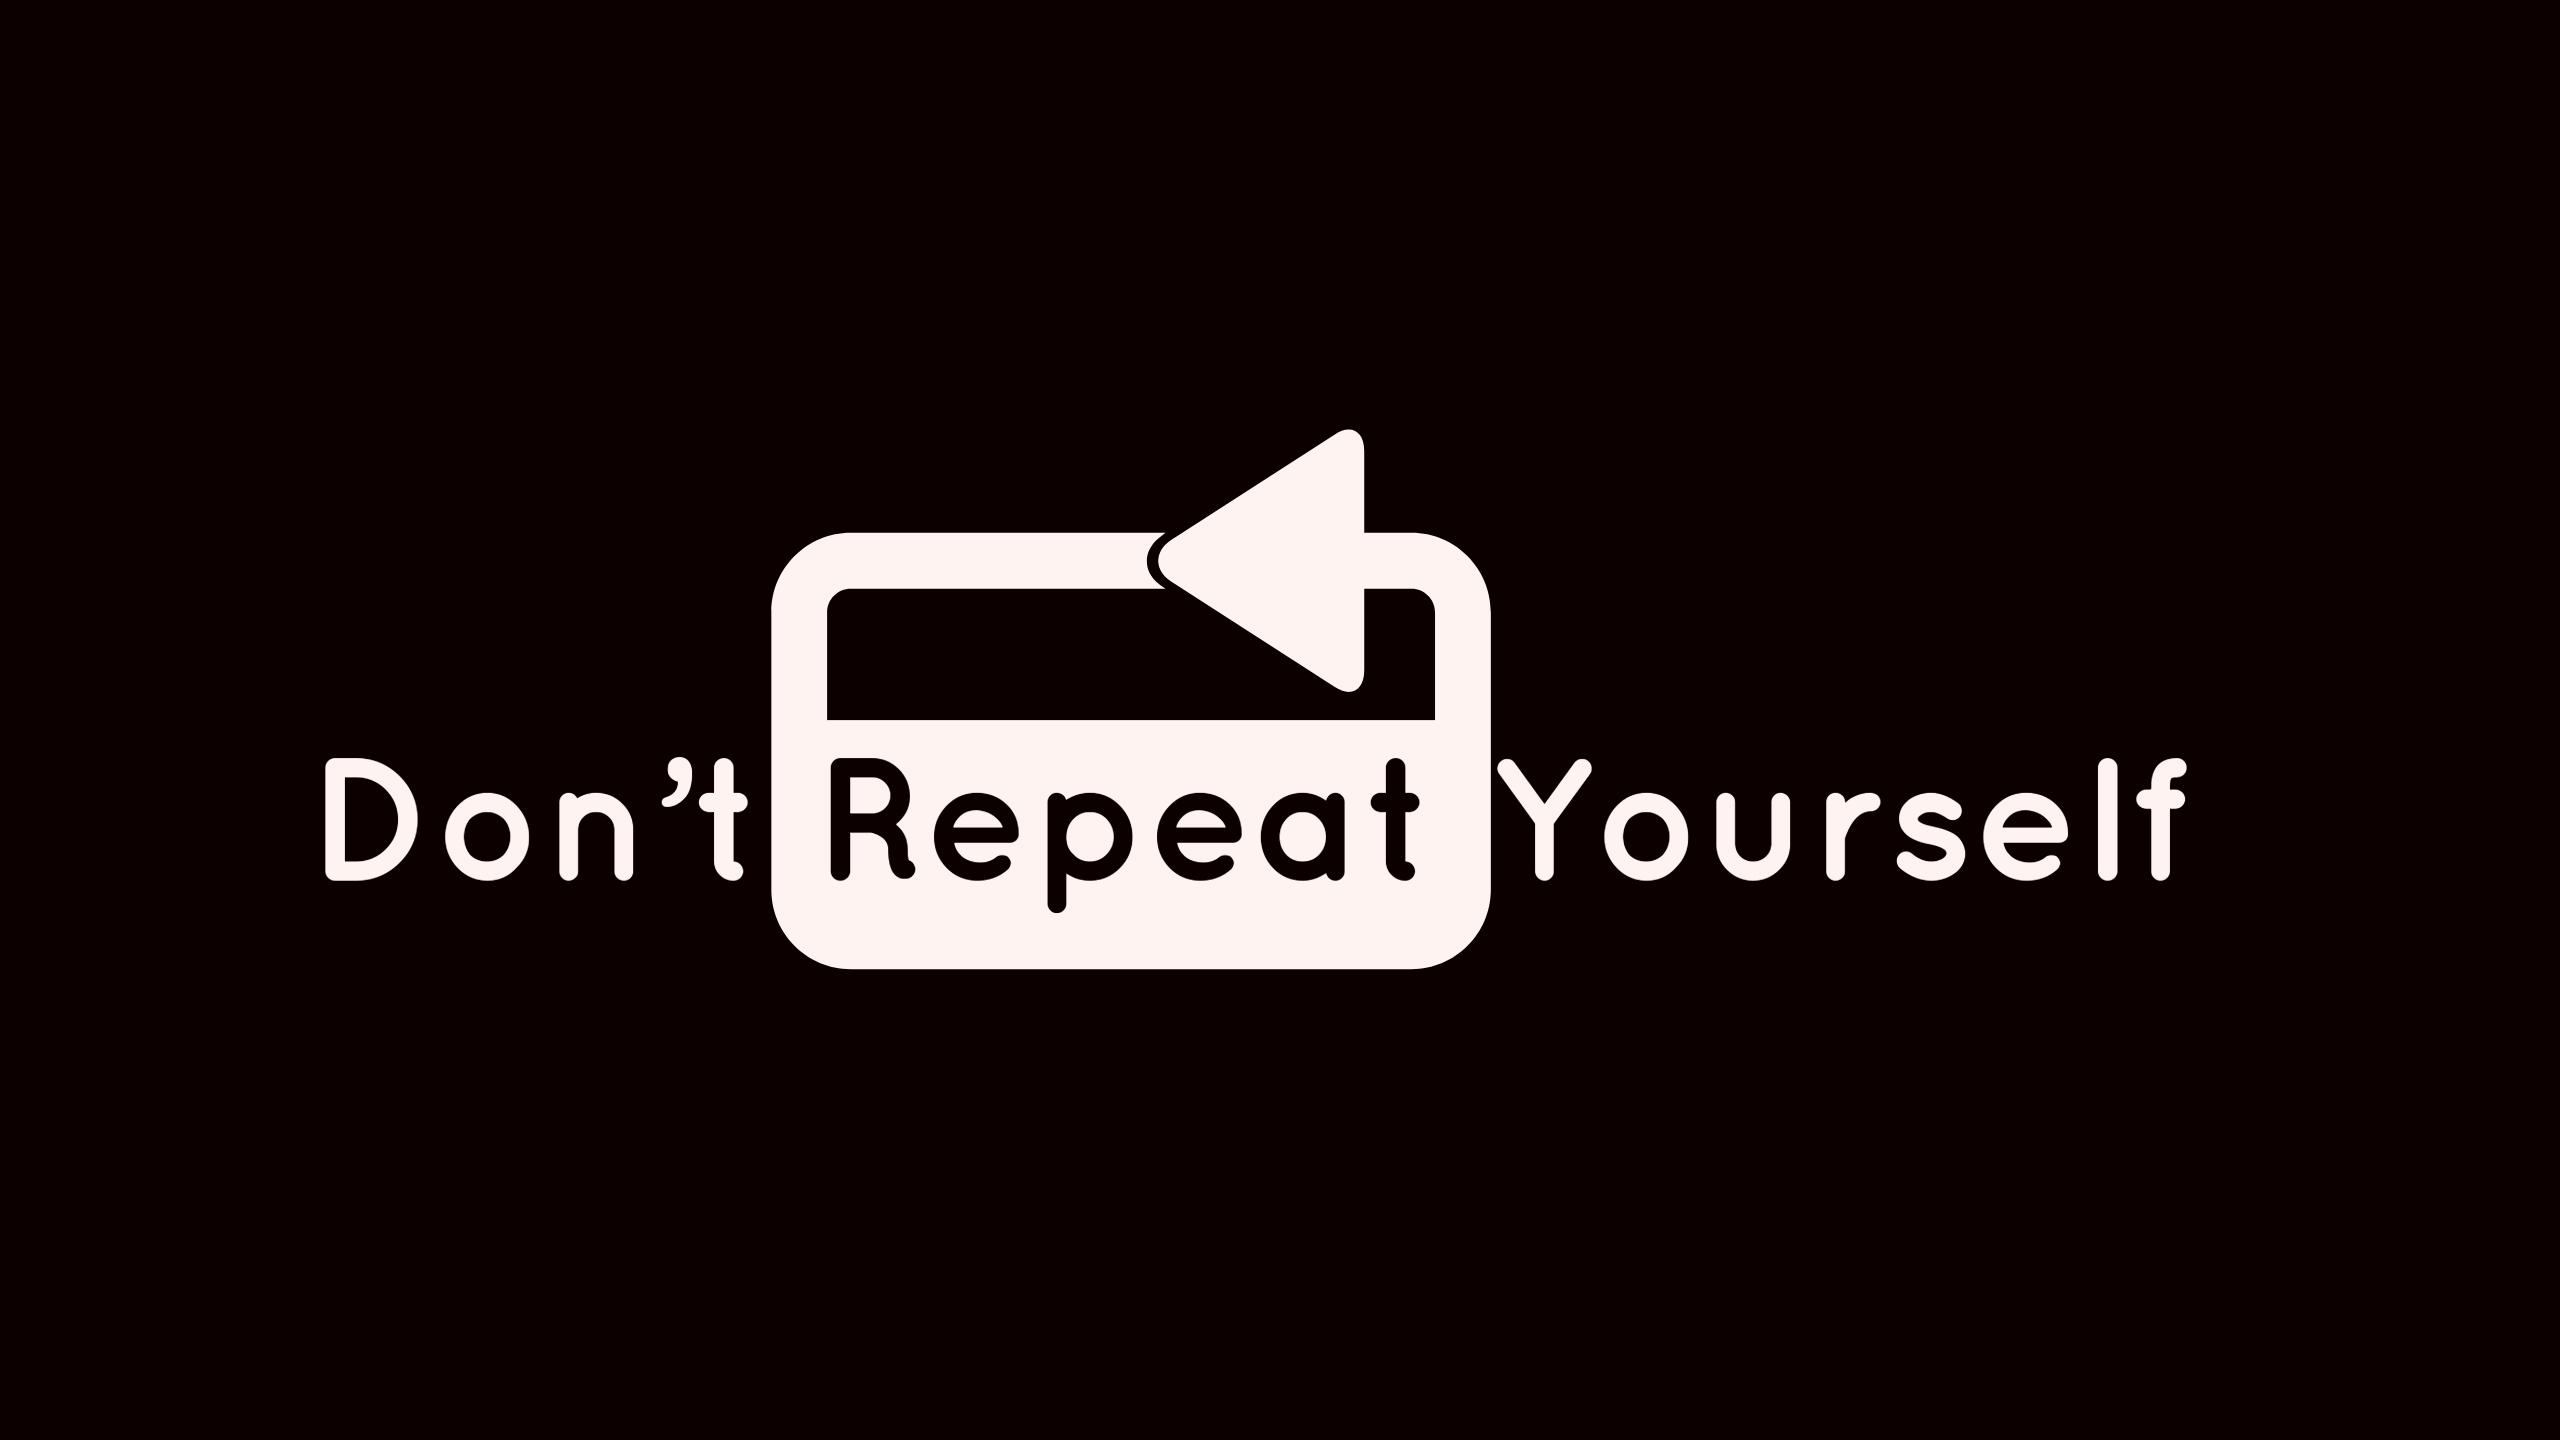 Dont home. Dry don't repeat yourself. Репит. Don't repeat yourself Dry принцип программирования. Do not repeat.